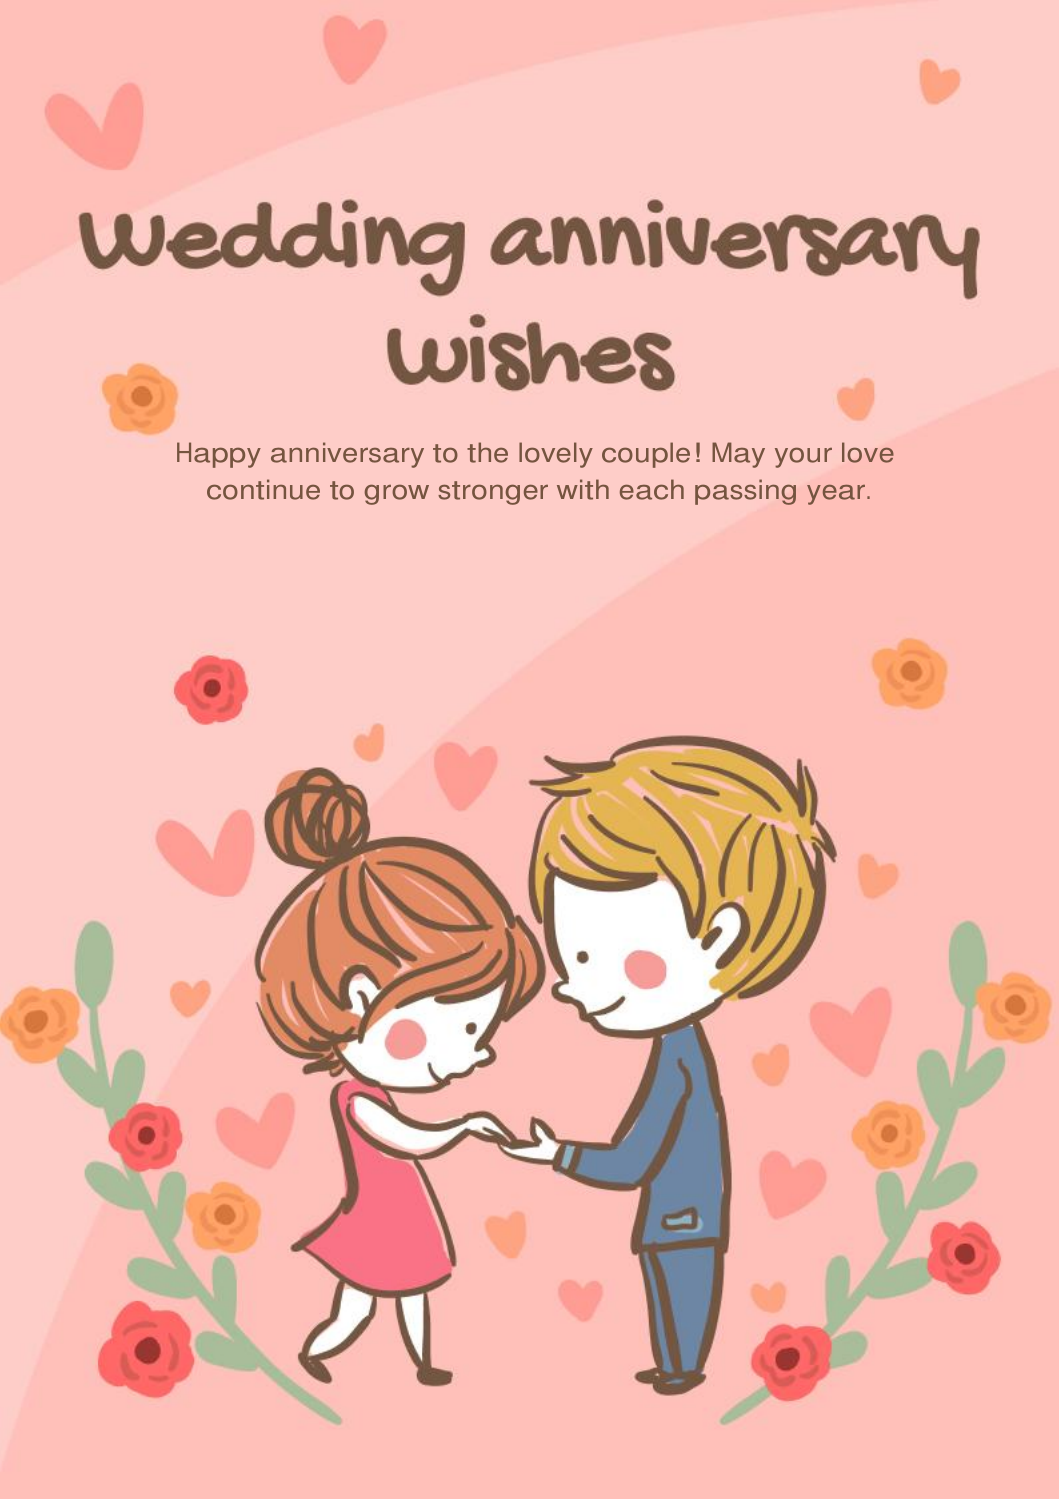 15 Anniversary Wishes for Husband: Funny Ideas